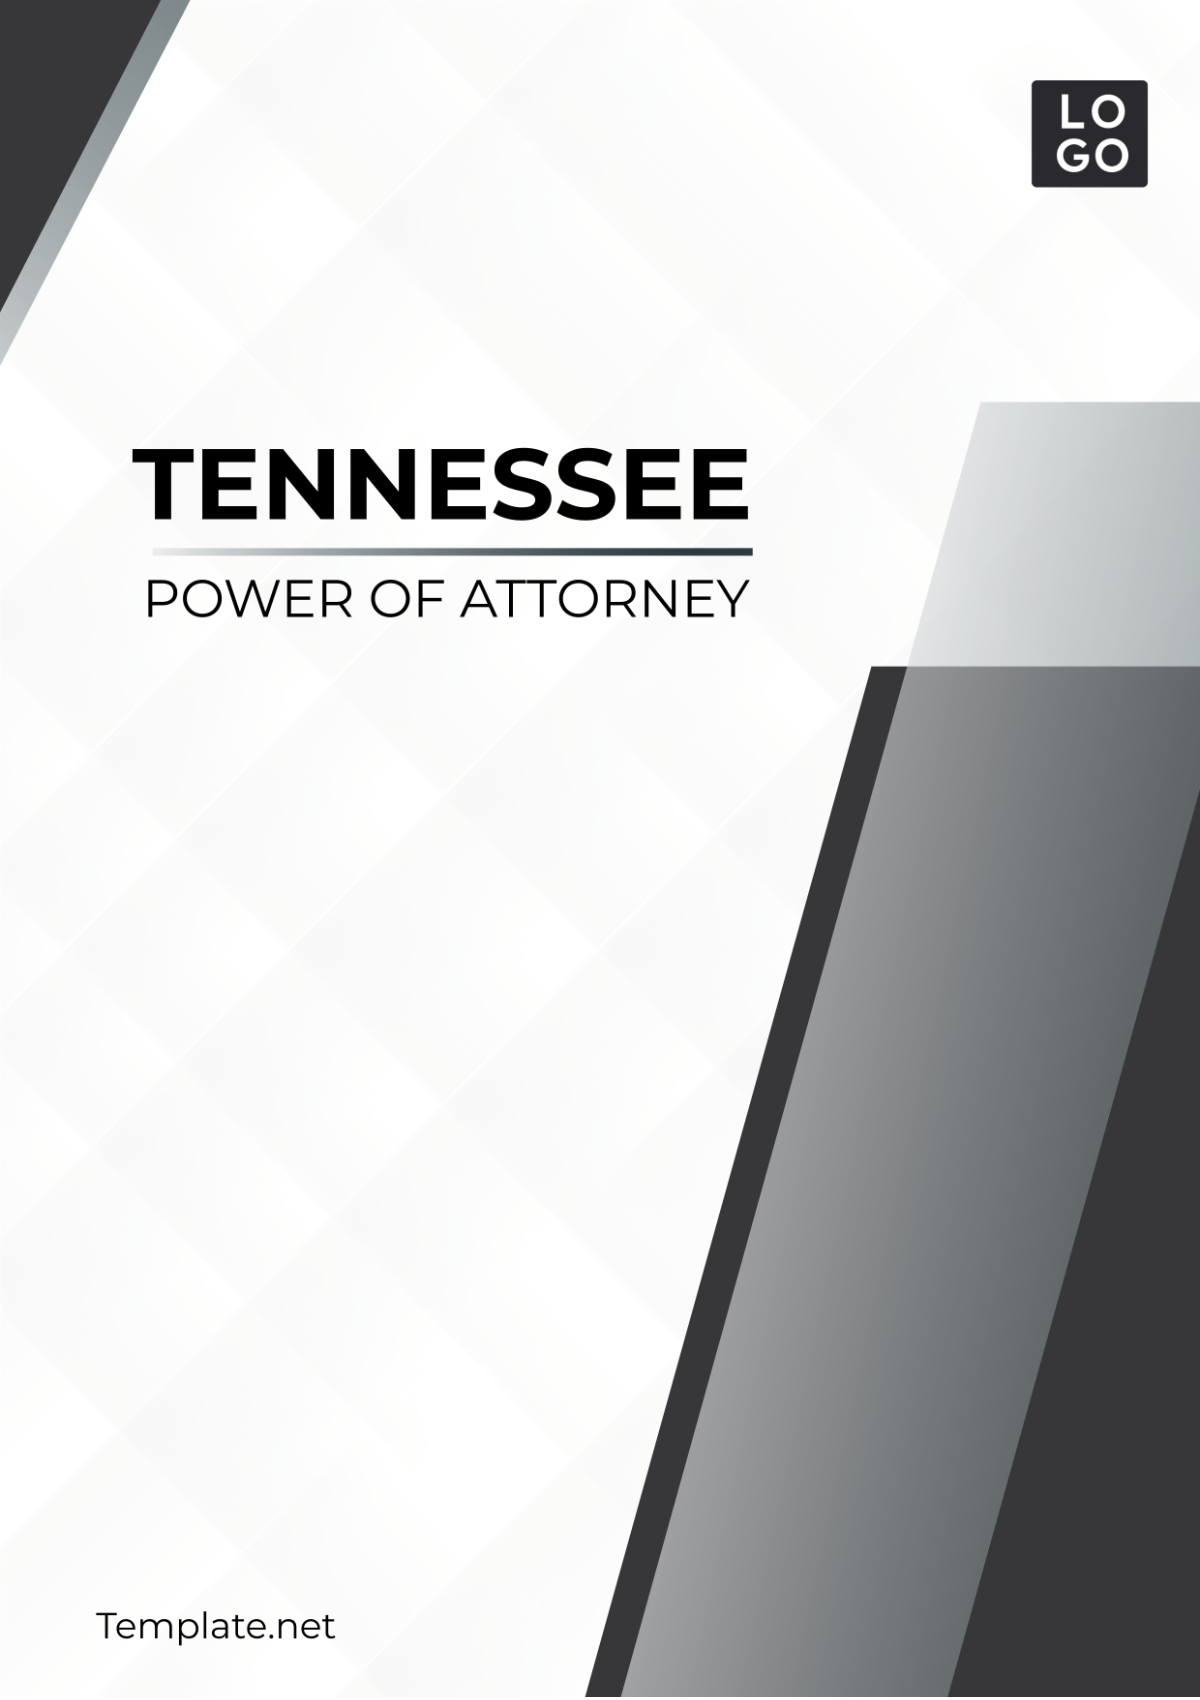 Tennessee Power of Attorney Template